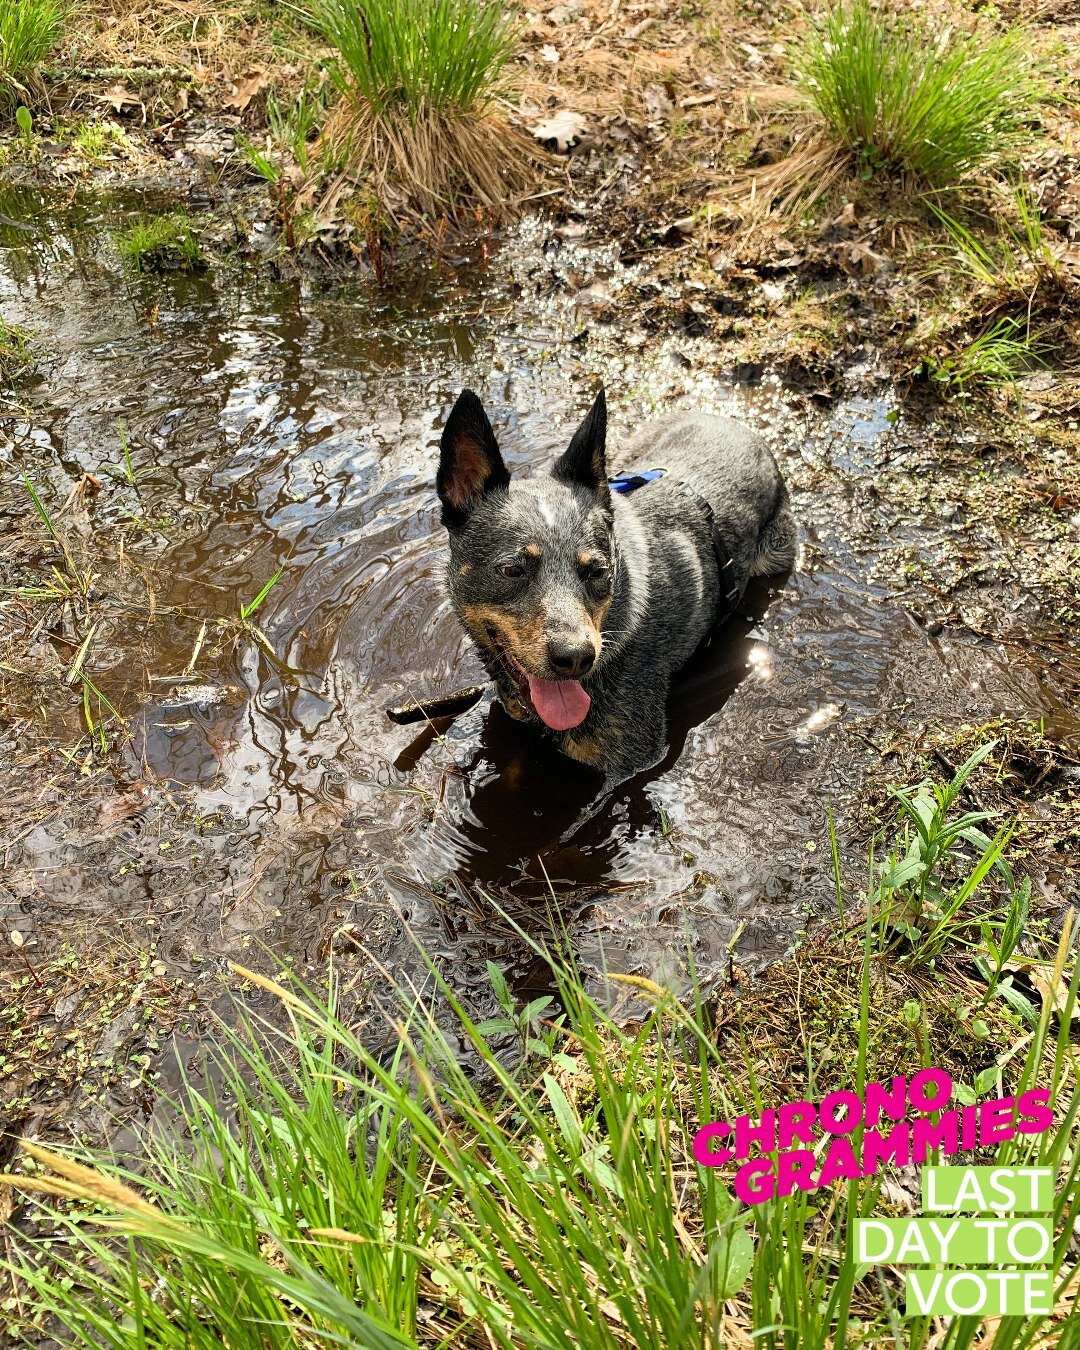 Nature walks, mud, splashing, bathtime, zoomies and napping - it's the cycle of a pet parent's life! 

LAST DAY TO VOTE #chronogrammies 
Link in bio. 

 #rhinebeck #redhook #rhinecliff #doglover #dogs #dogstagram #dogtraining #dogsofsptraining #rewar